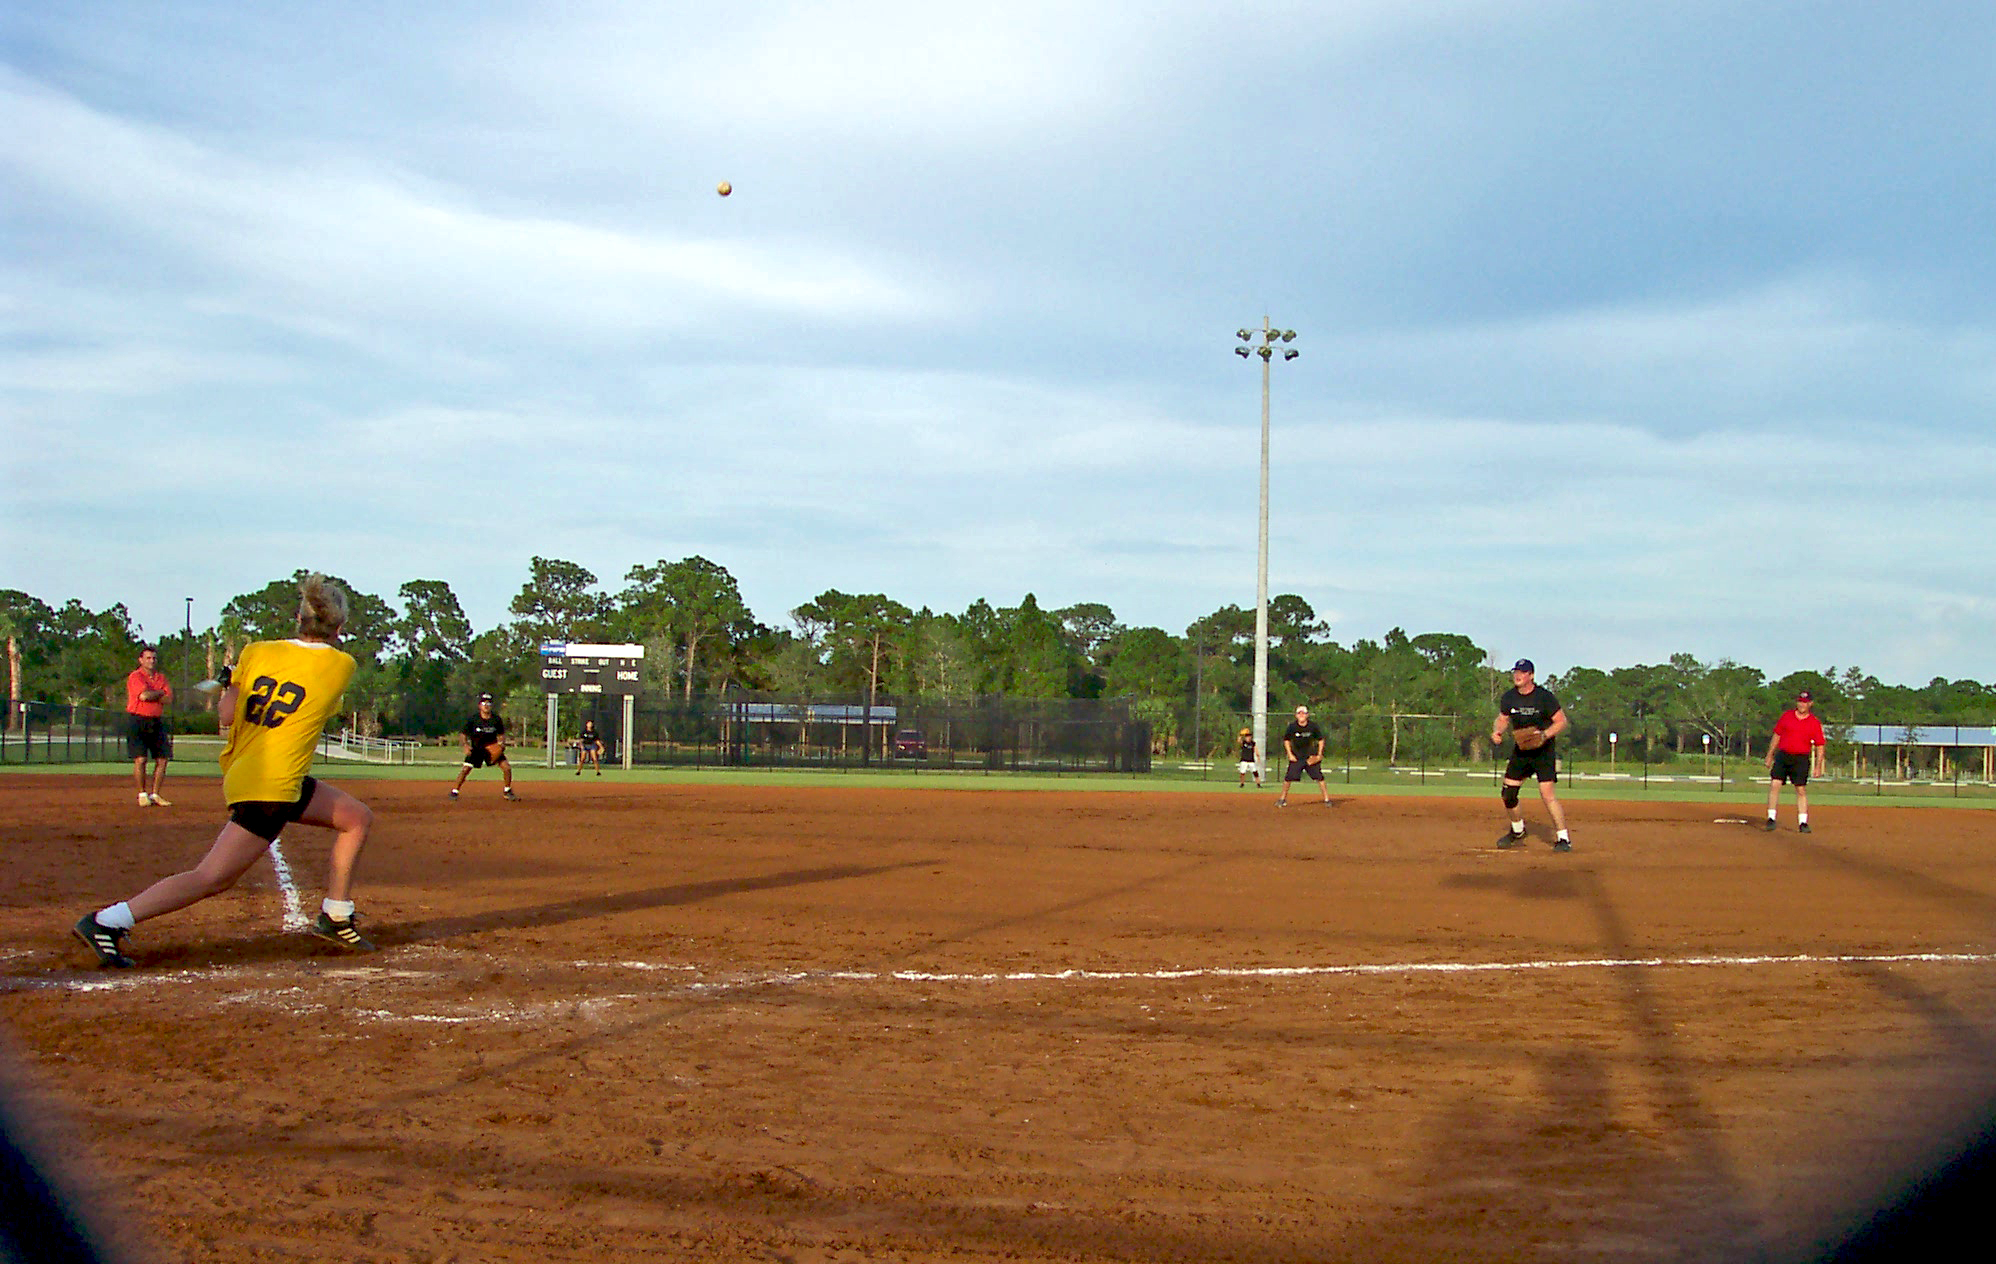 A woman swinging a bat during a softball game